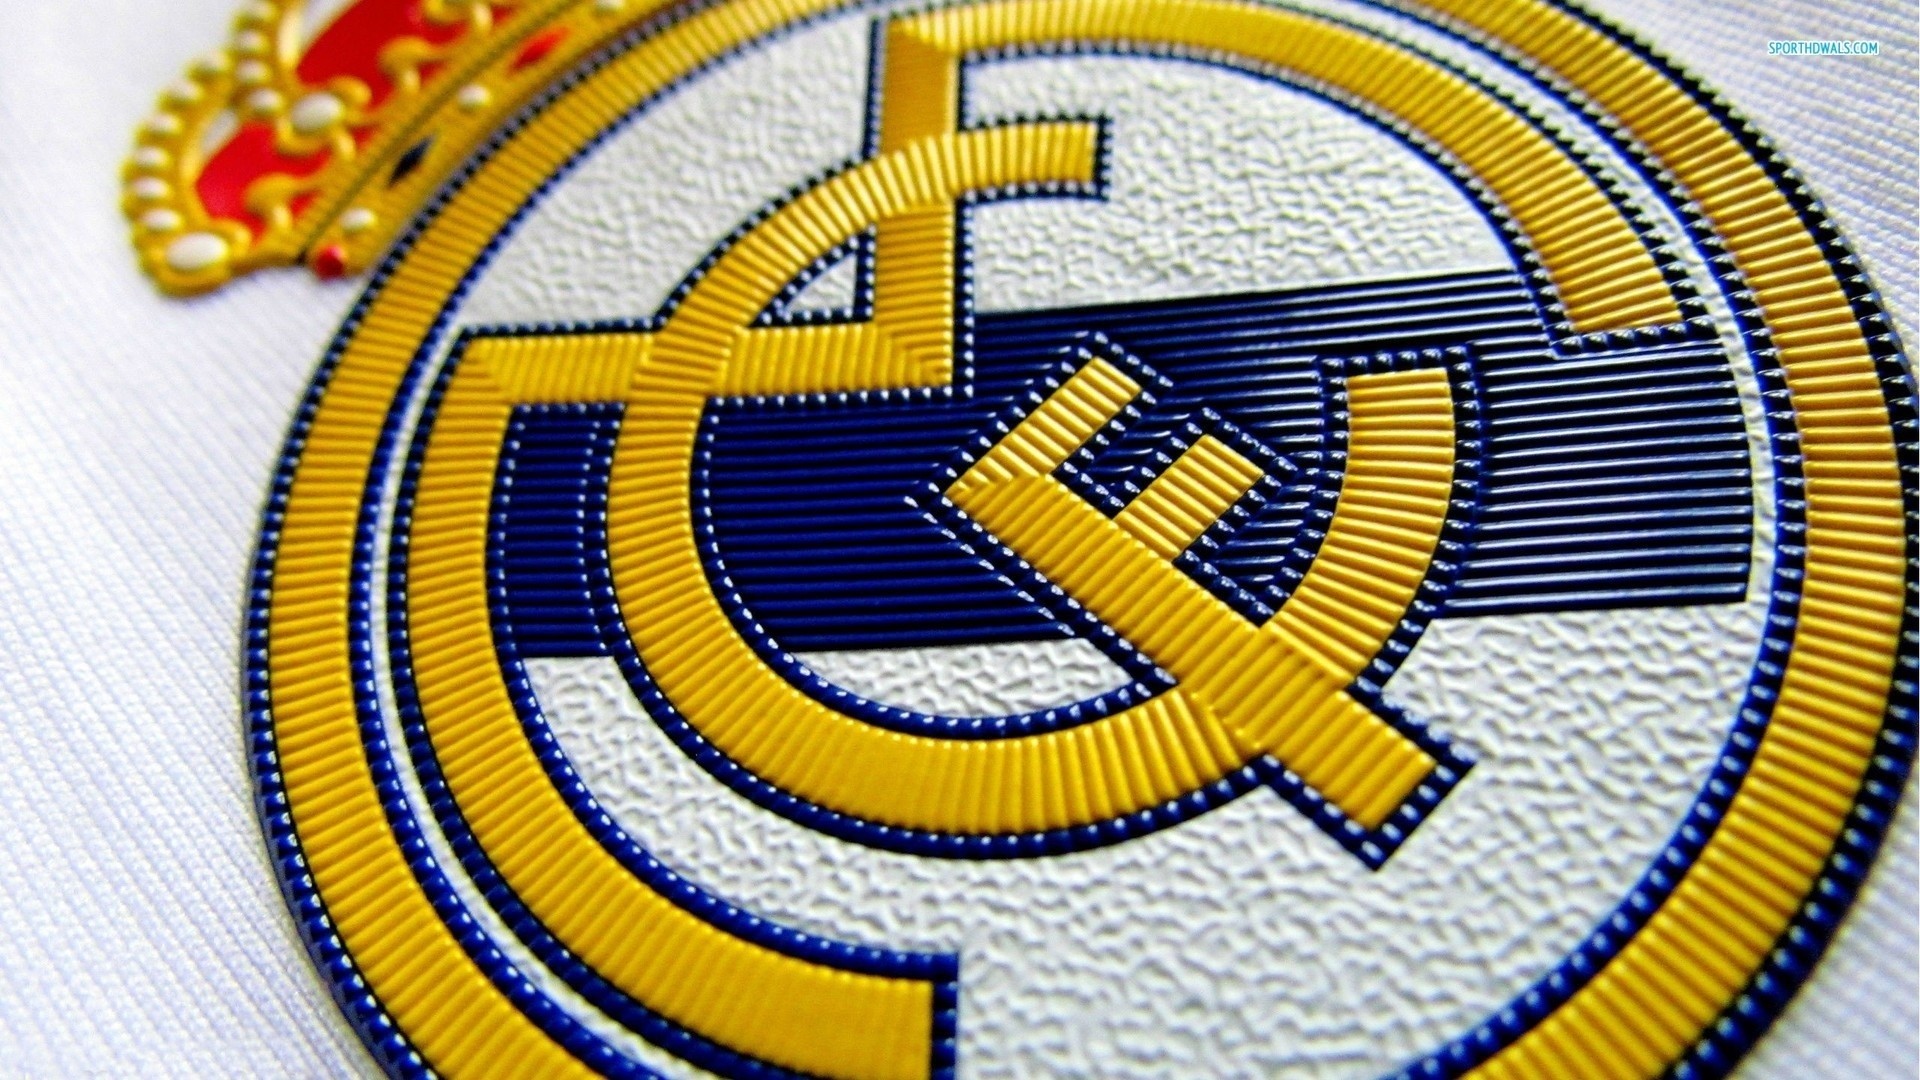 Real Madrid Backgrounds HD With Resolution 1920X1080 pixel. You can make this wallpaper for your Mac or Windows Desktop Background, iPhone, Android or Tablet and another Smartphone device for free